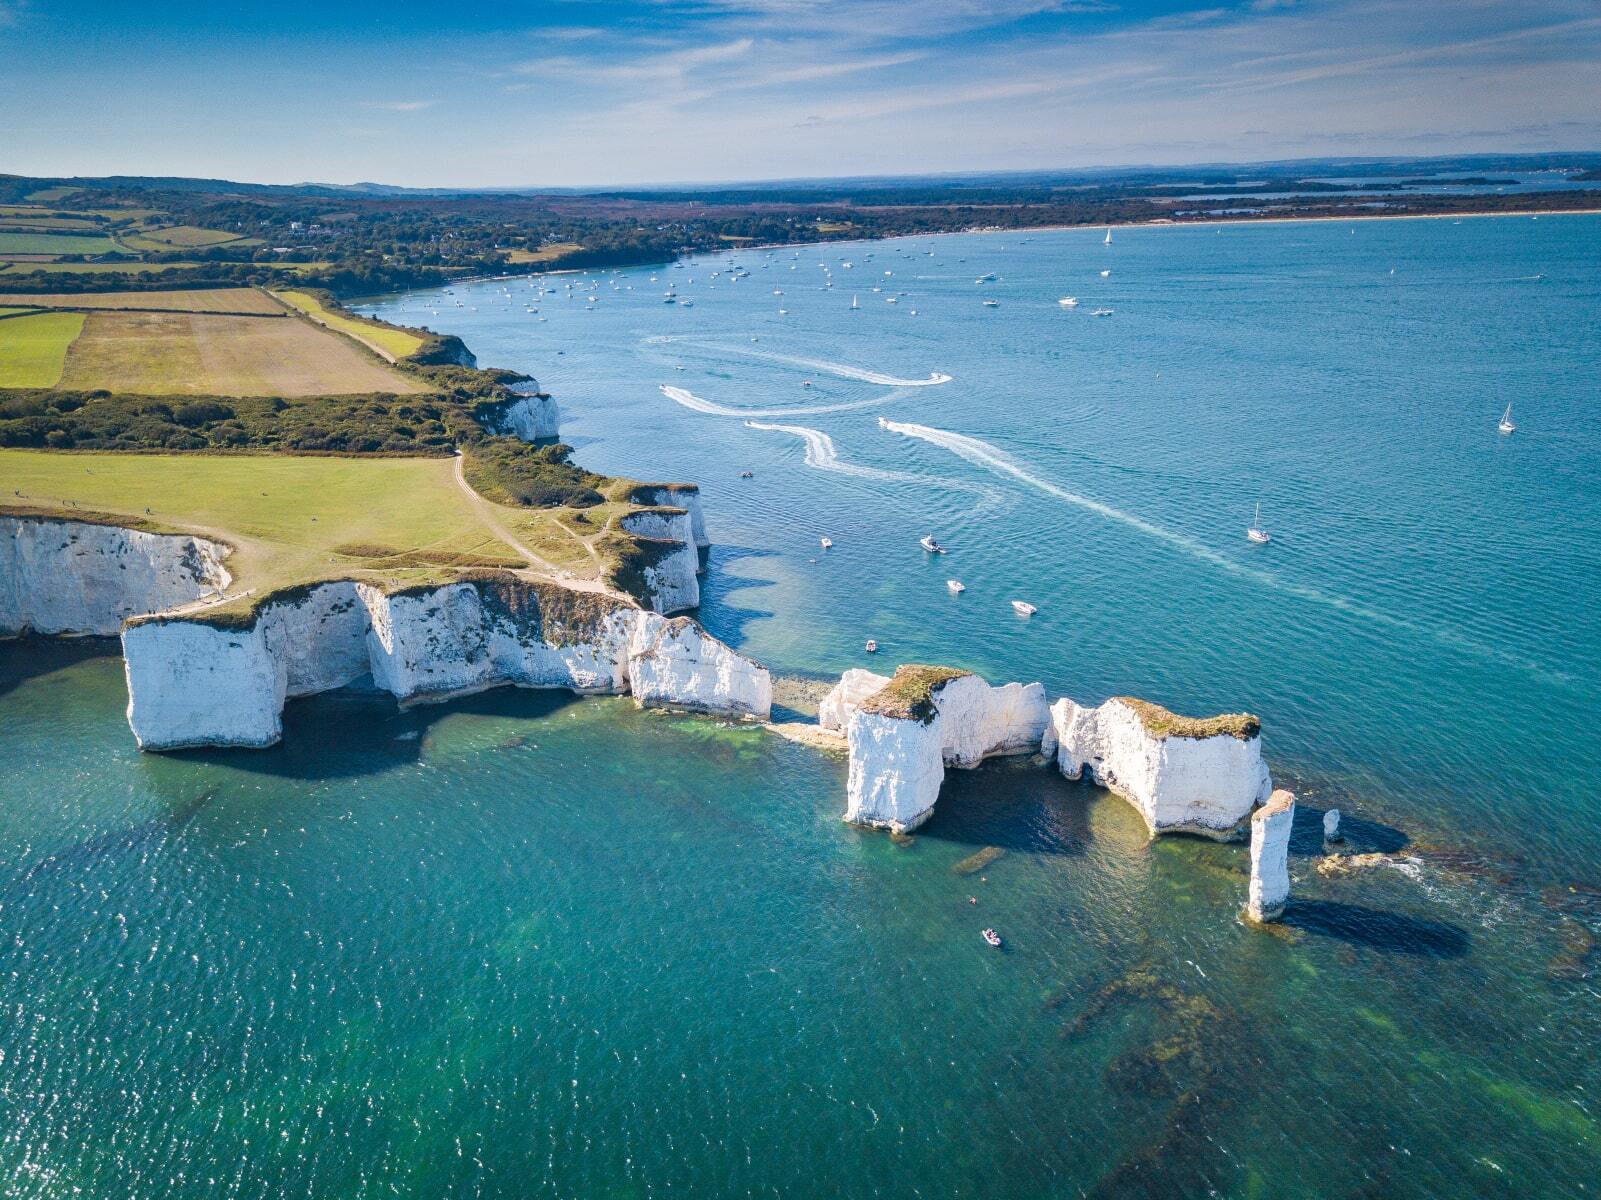 <p>Also located in the county of Dorset, <a href="https://jurassiccoast.org/visit/attractions/old-harry-rocks/" class="atom_link atom_valid" rel="noreferrer noopener">Old Harry Rocks</a> is another breathtaking area you won’t want to miss. Its huge limestone rocks extend into the English Channel and are as impressive to see on land as they are from the sea in a kayak. A number of boat trips are also available to take you around the attractions of the Jurassic Coast.</p>